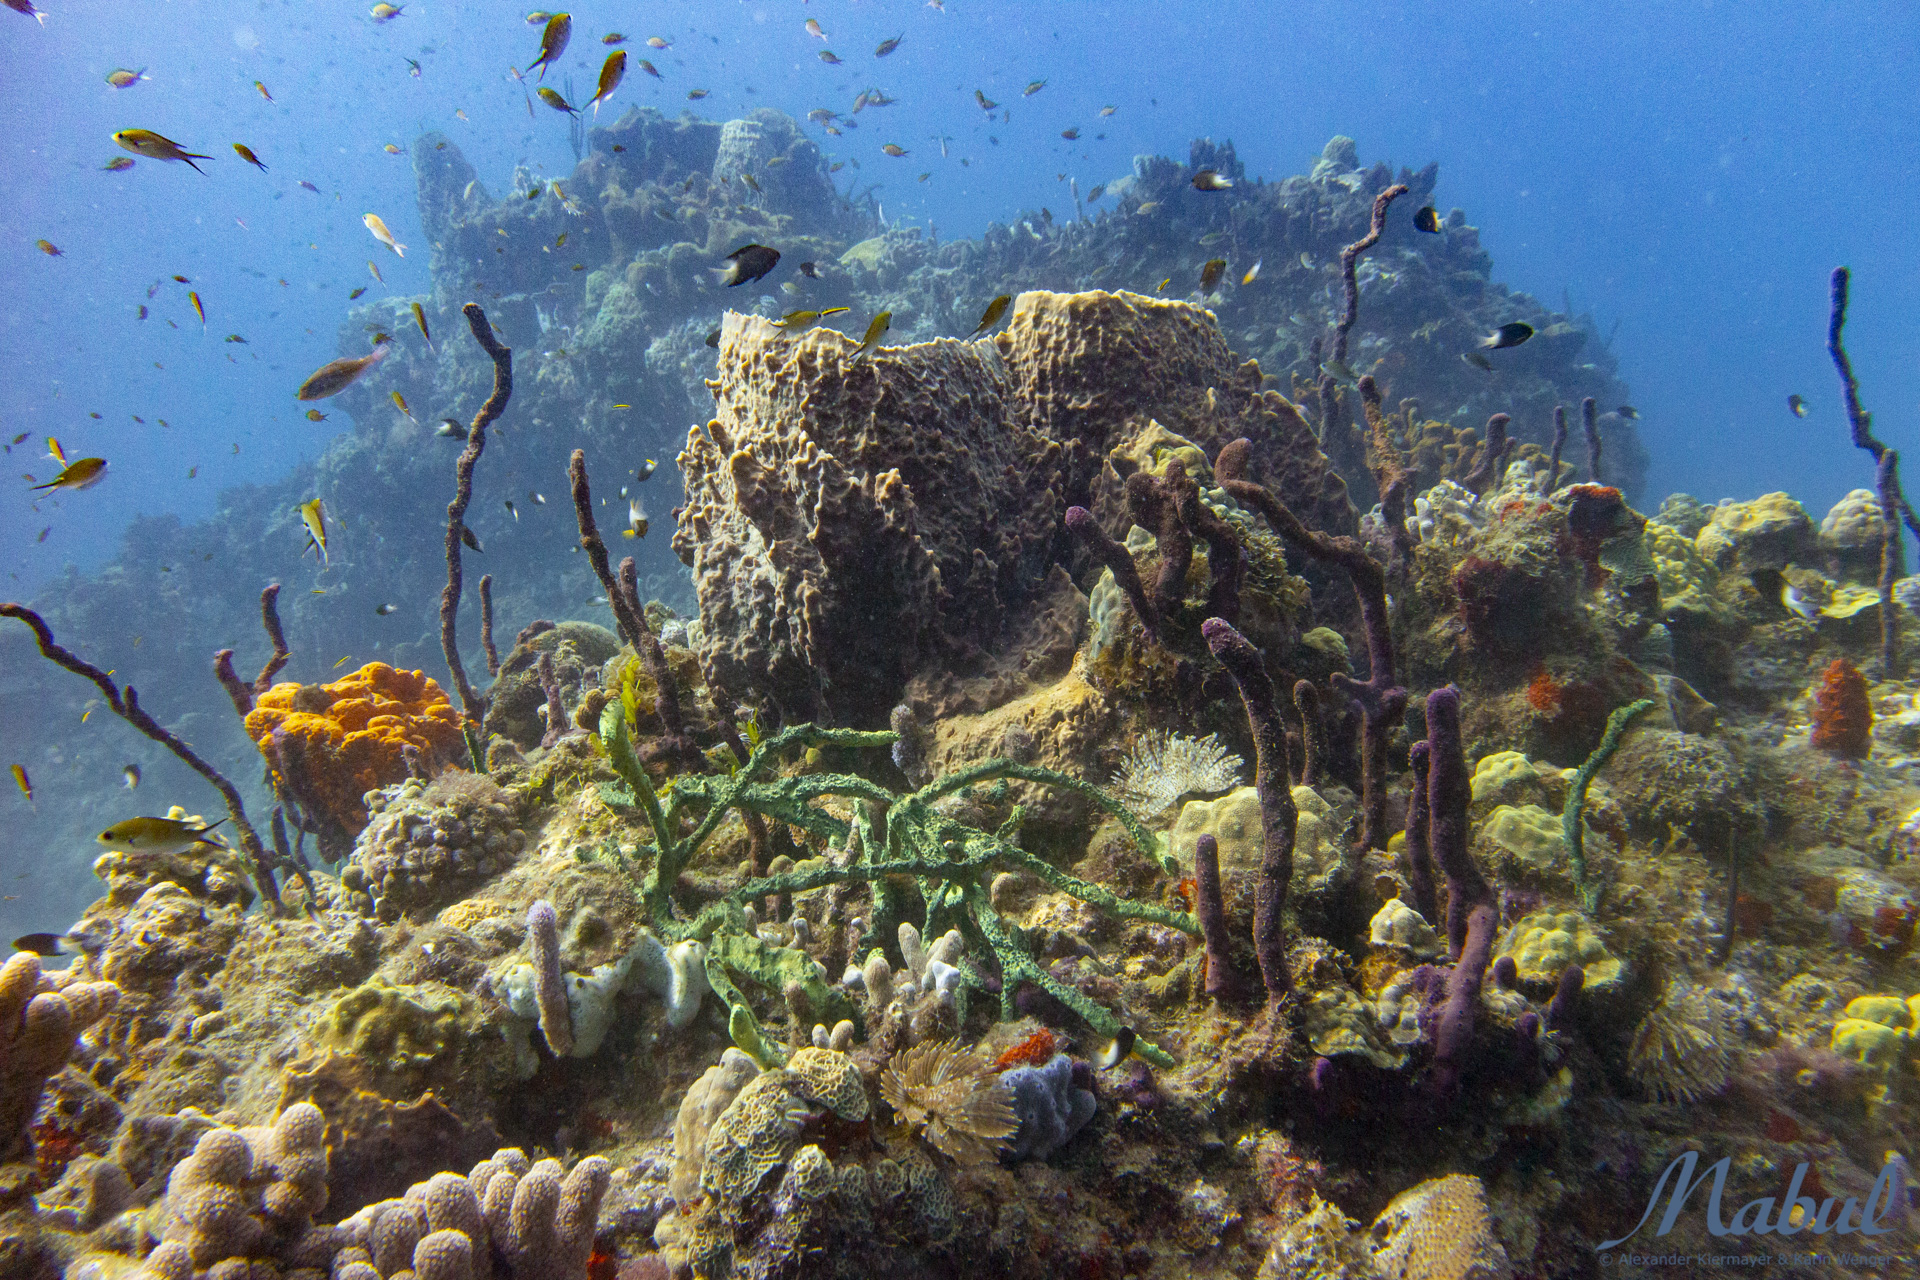 Gallery – Dominica Diving